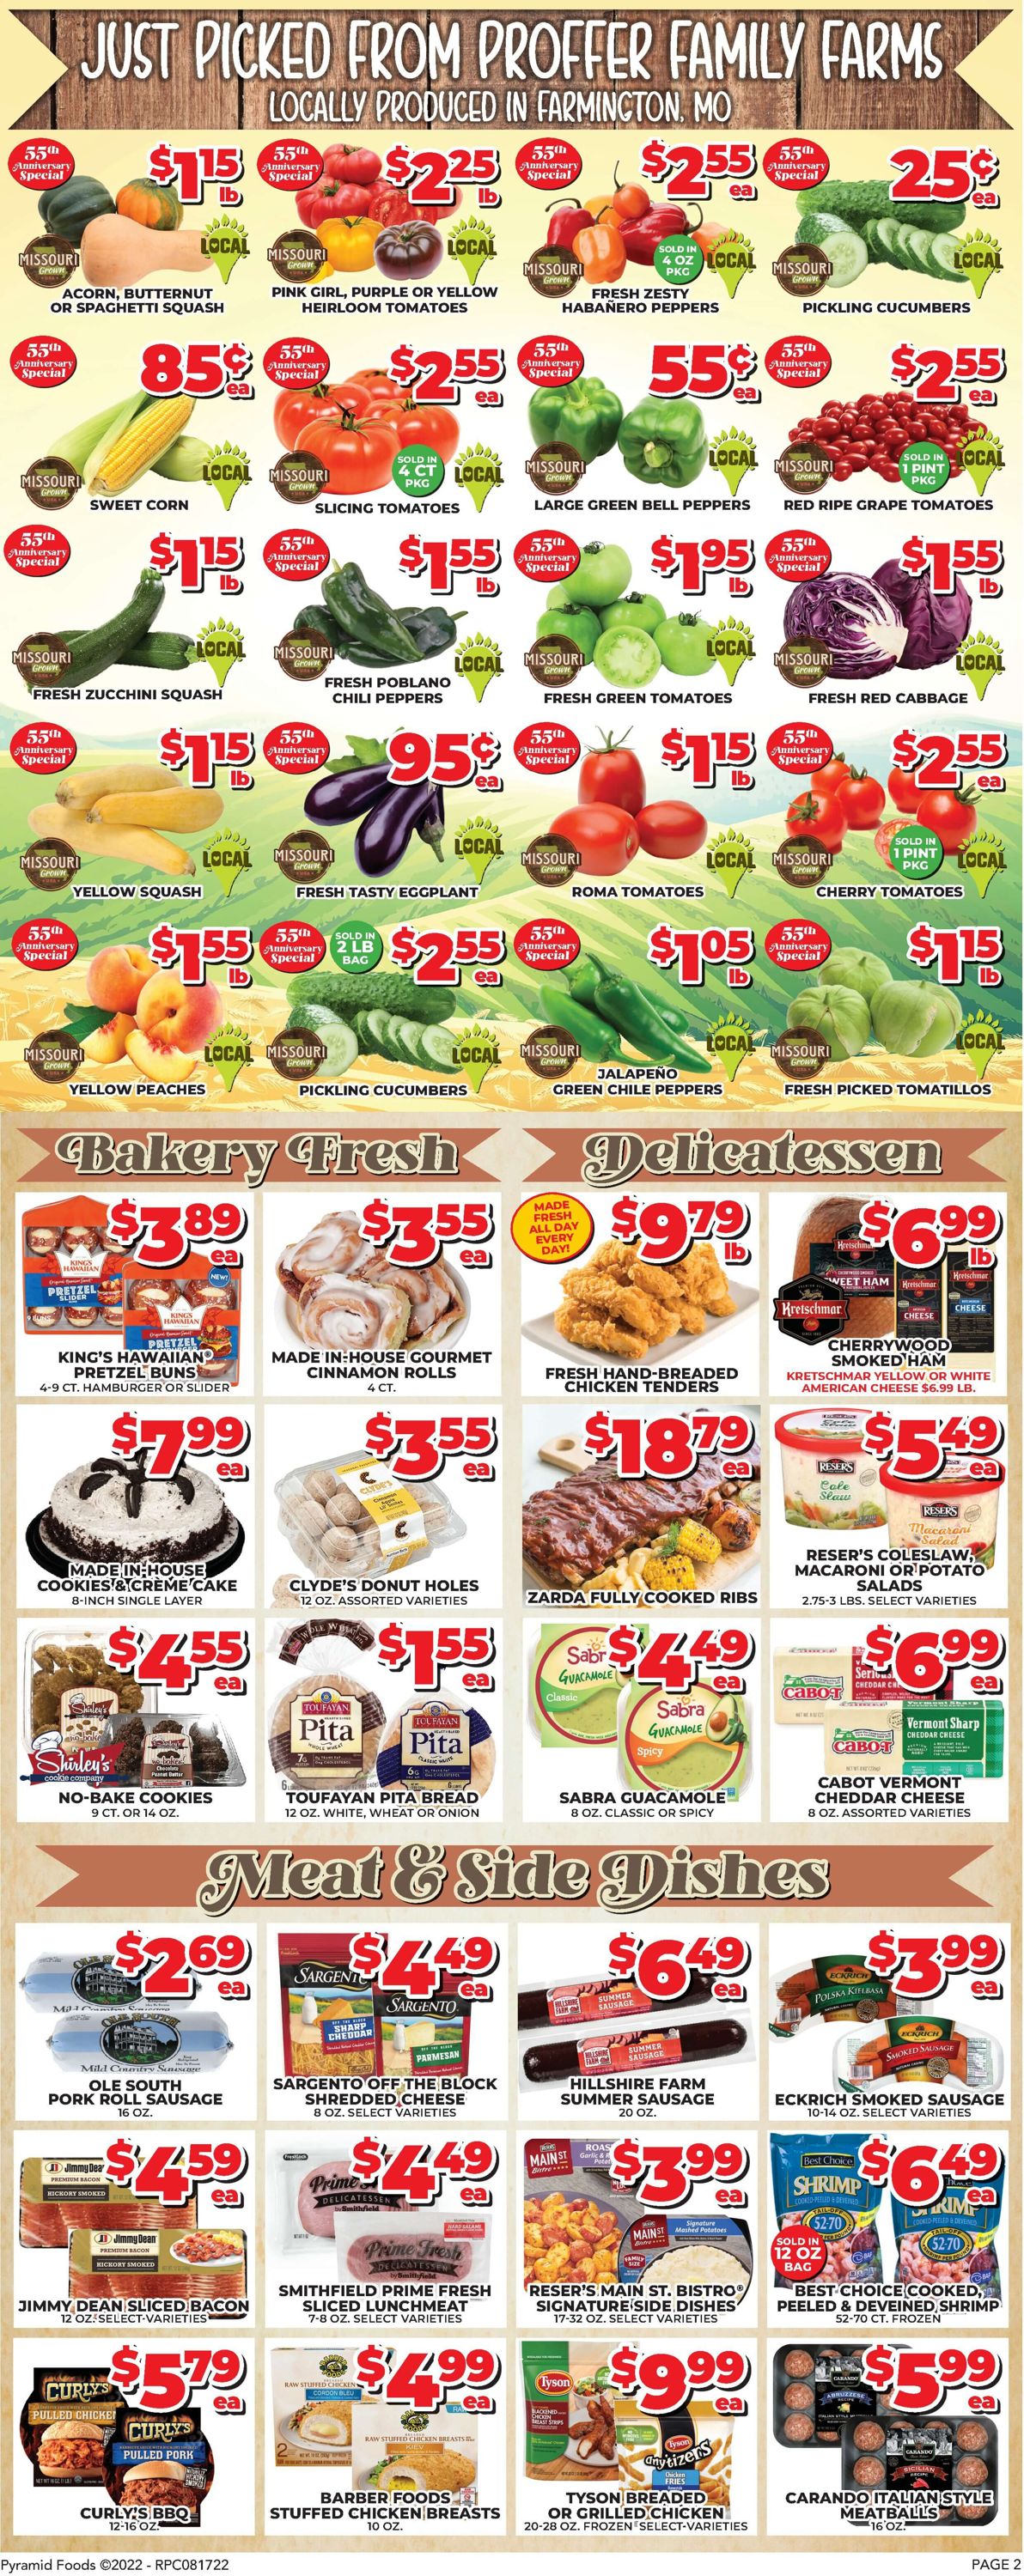 Price Cutter Weekly Ad Circular - valid 08/17-08/23/2022 (Page 2)